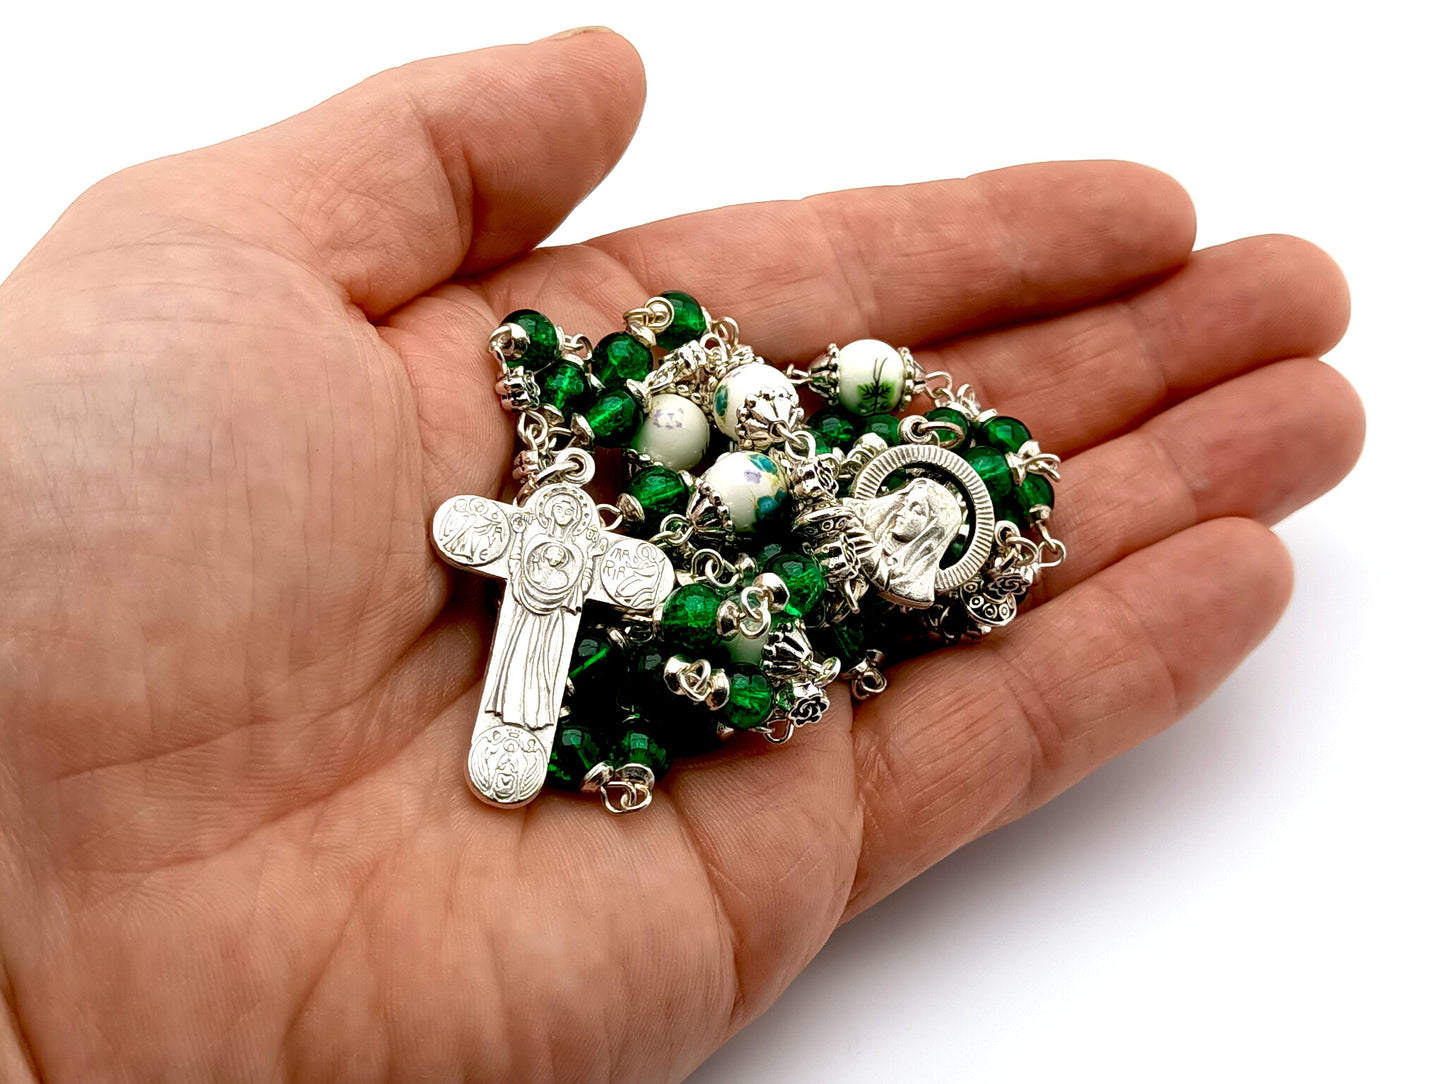 Our Lady of Sorrows unique rosary beads dolor rosary with green glass and porcelain beads, silver crucifix, centre medal and bead caps.